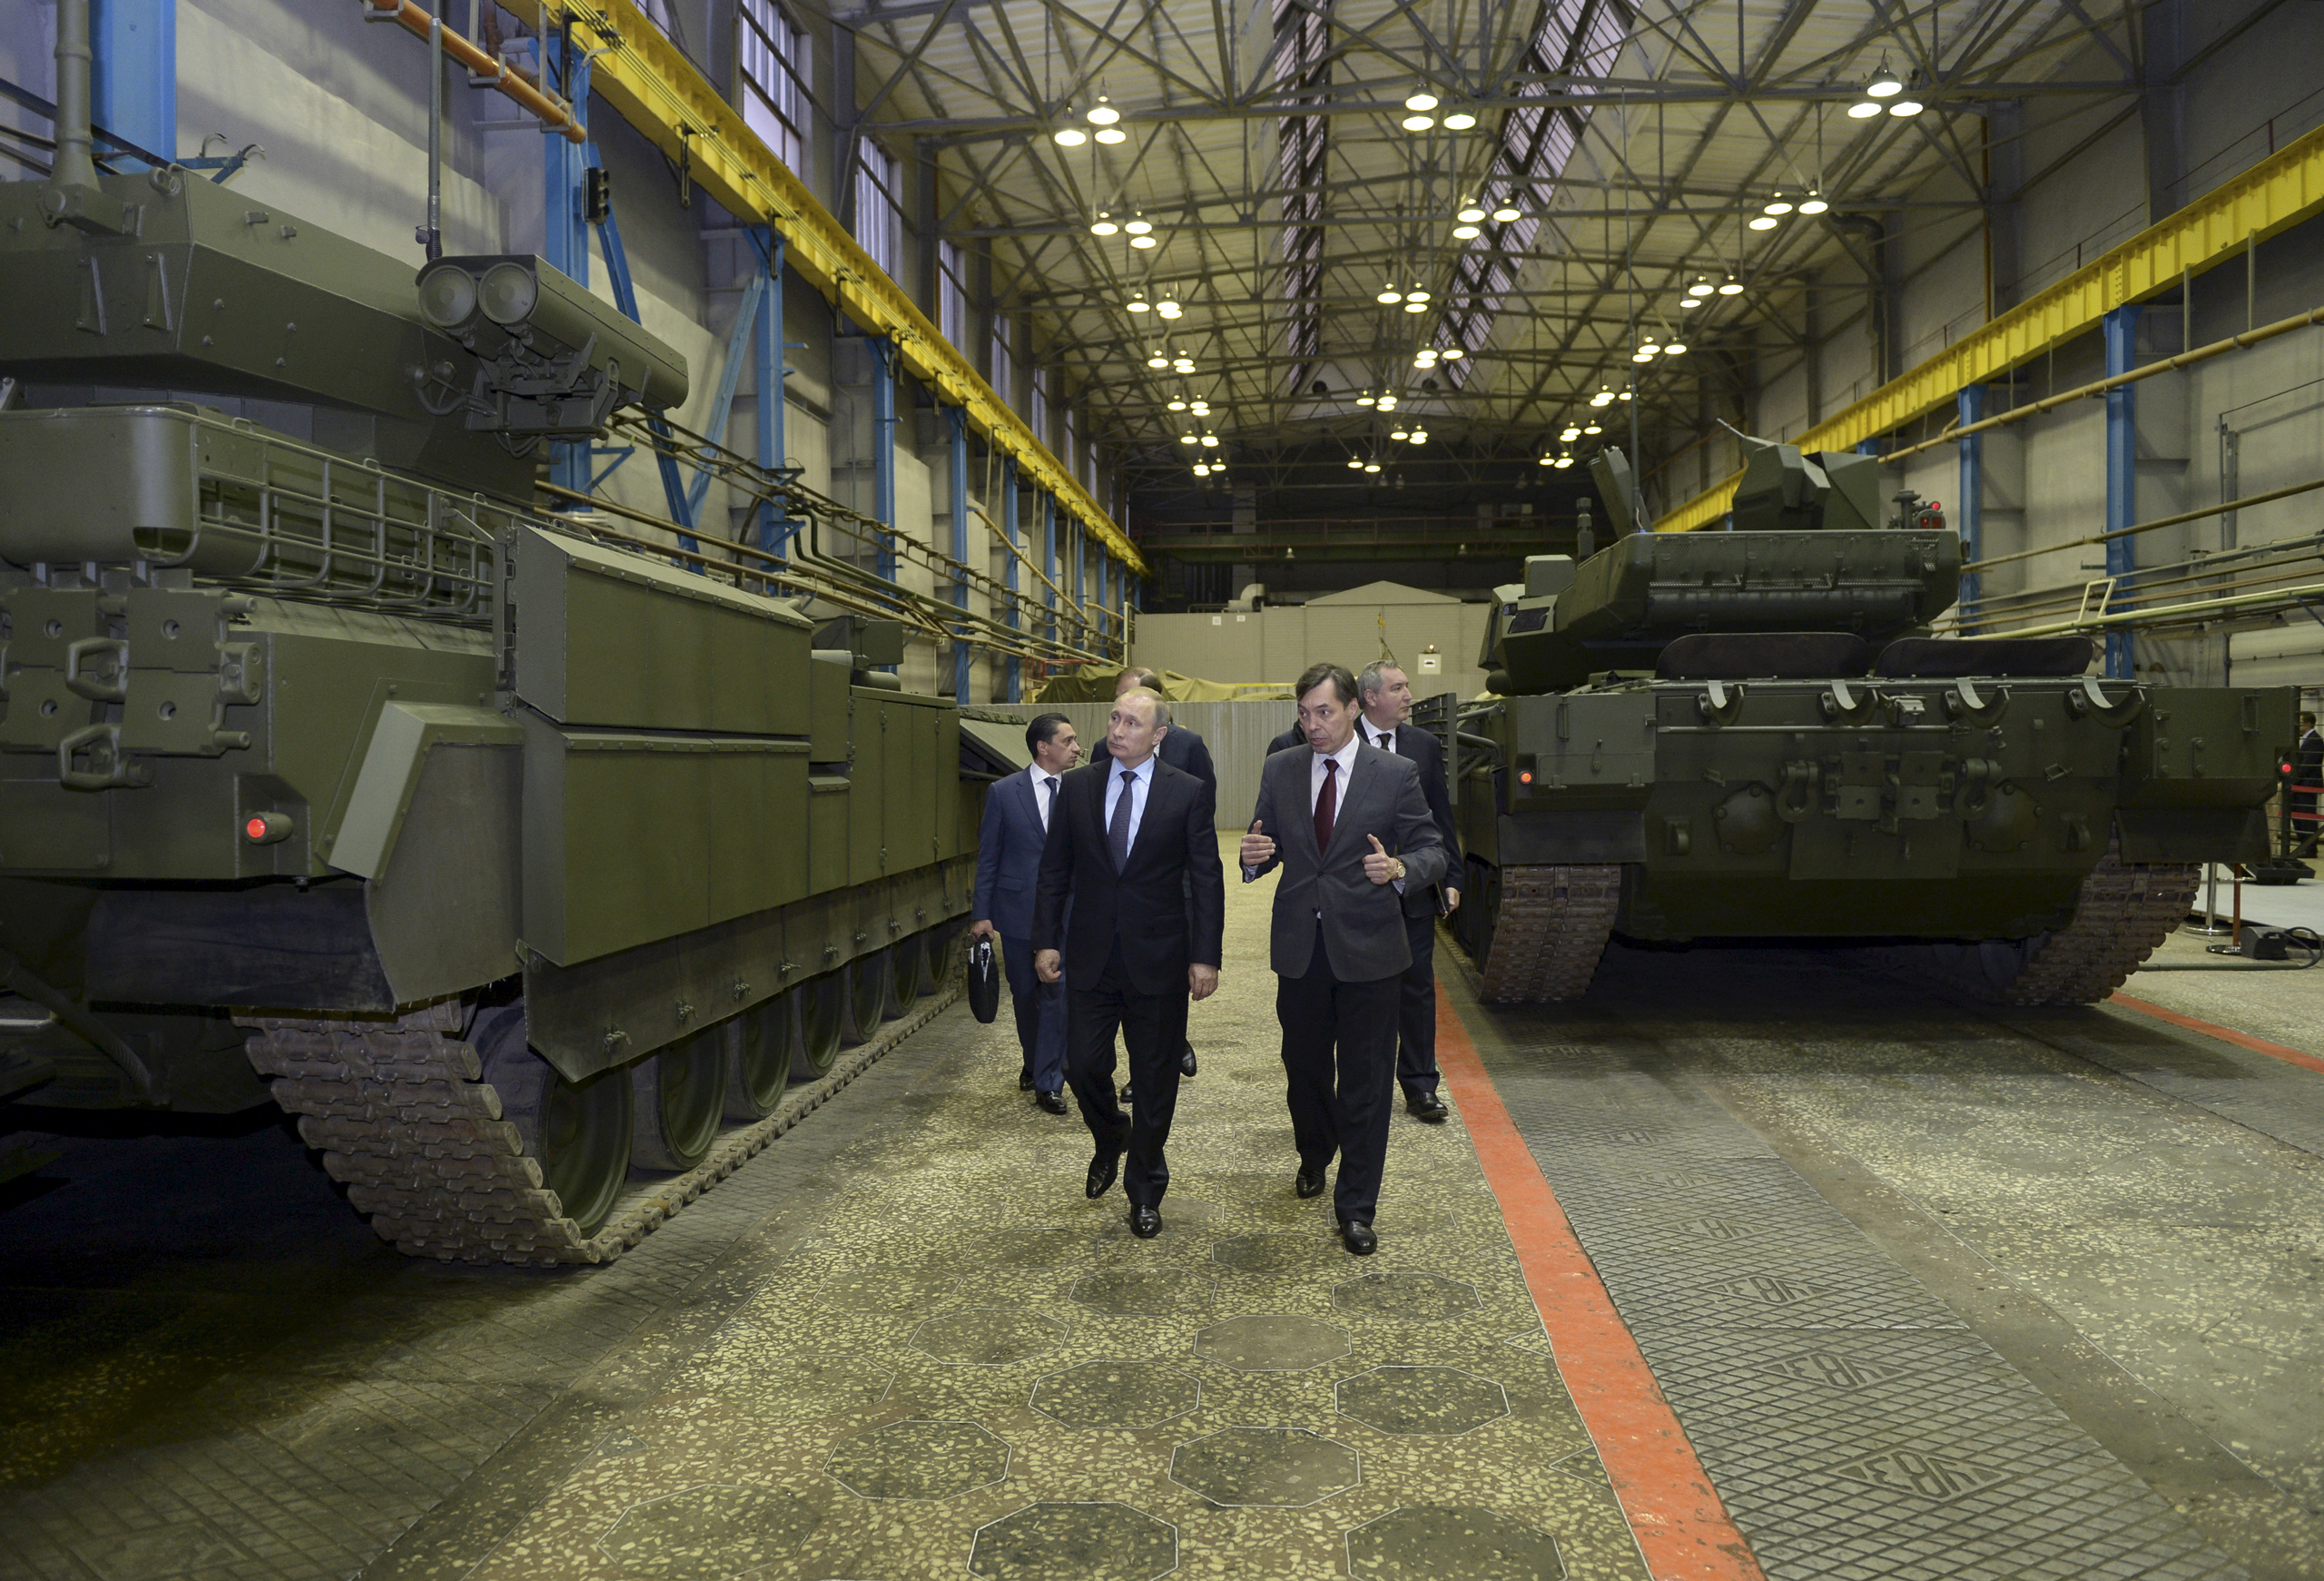 Russian President Vladimir Putin and Andrei Terlikov, the head of the Ural Transport Machine Building Design Bureau, walk by a Russian infantry fighting vehicle and a battle tank at the Uralvagonzavod factory in Nizhny Tagil, Russia, on Nov. 25, 2015. (Alexei Nikolskyi—Reuters)